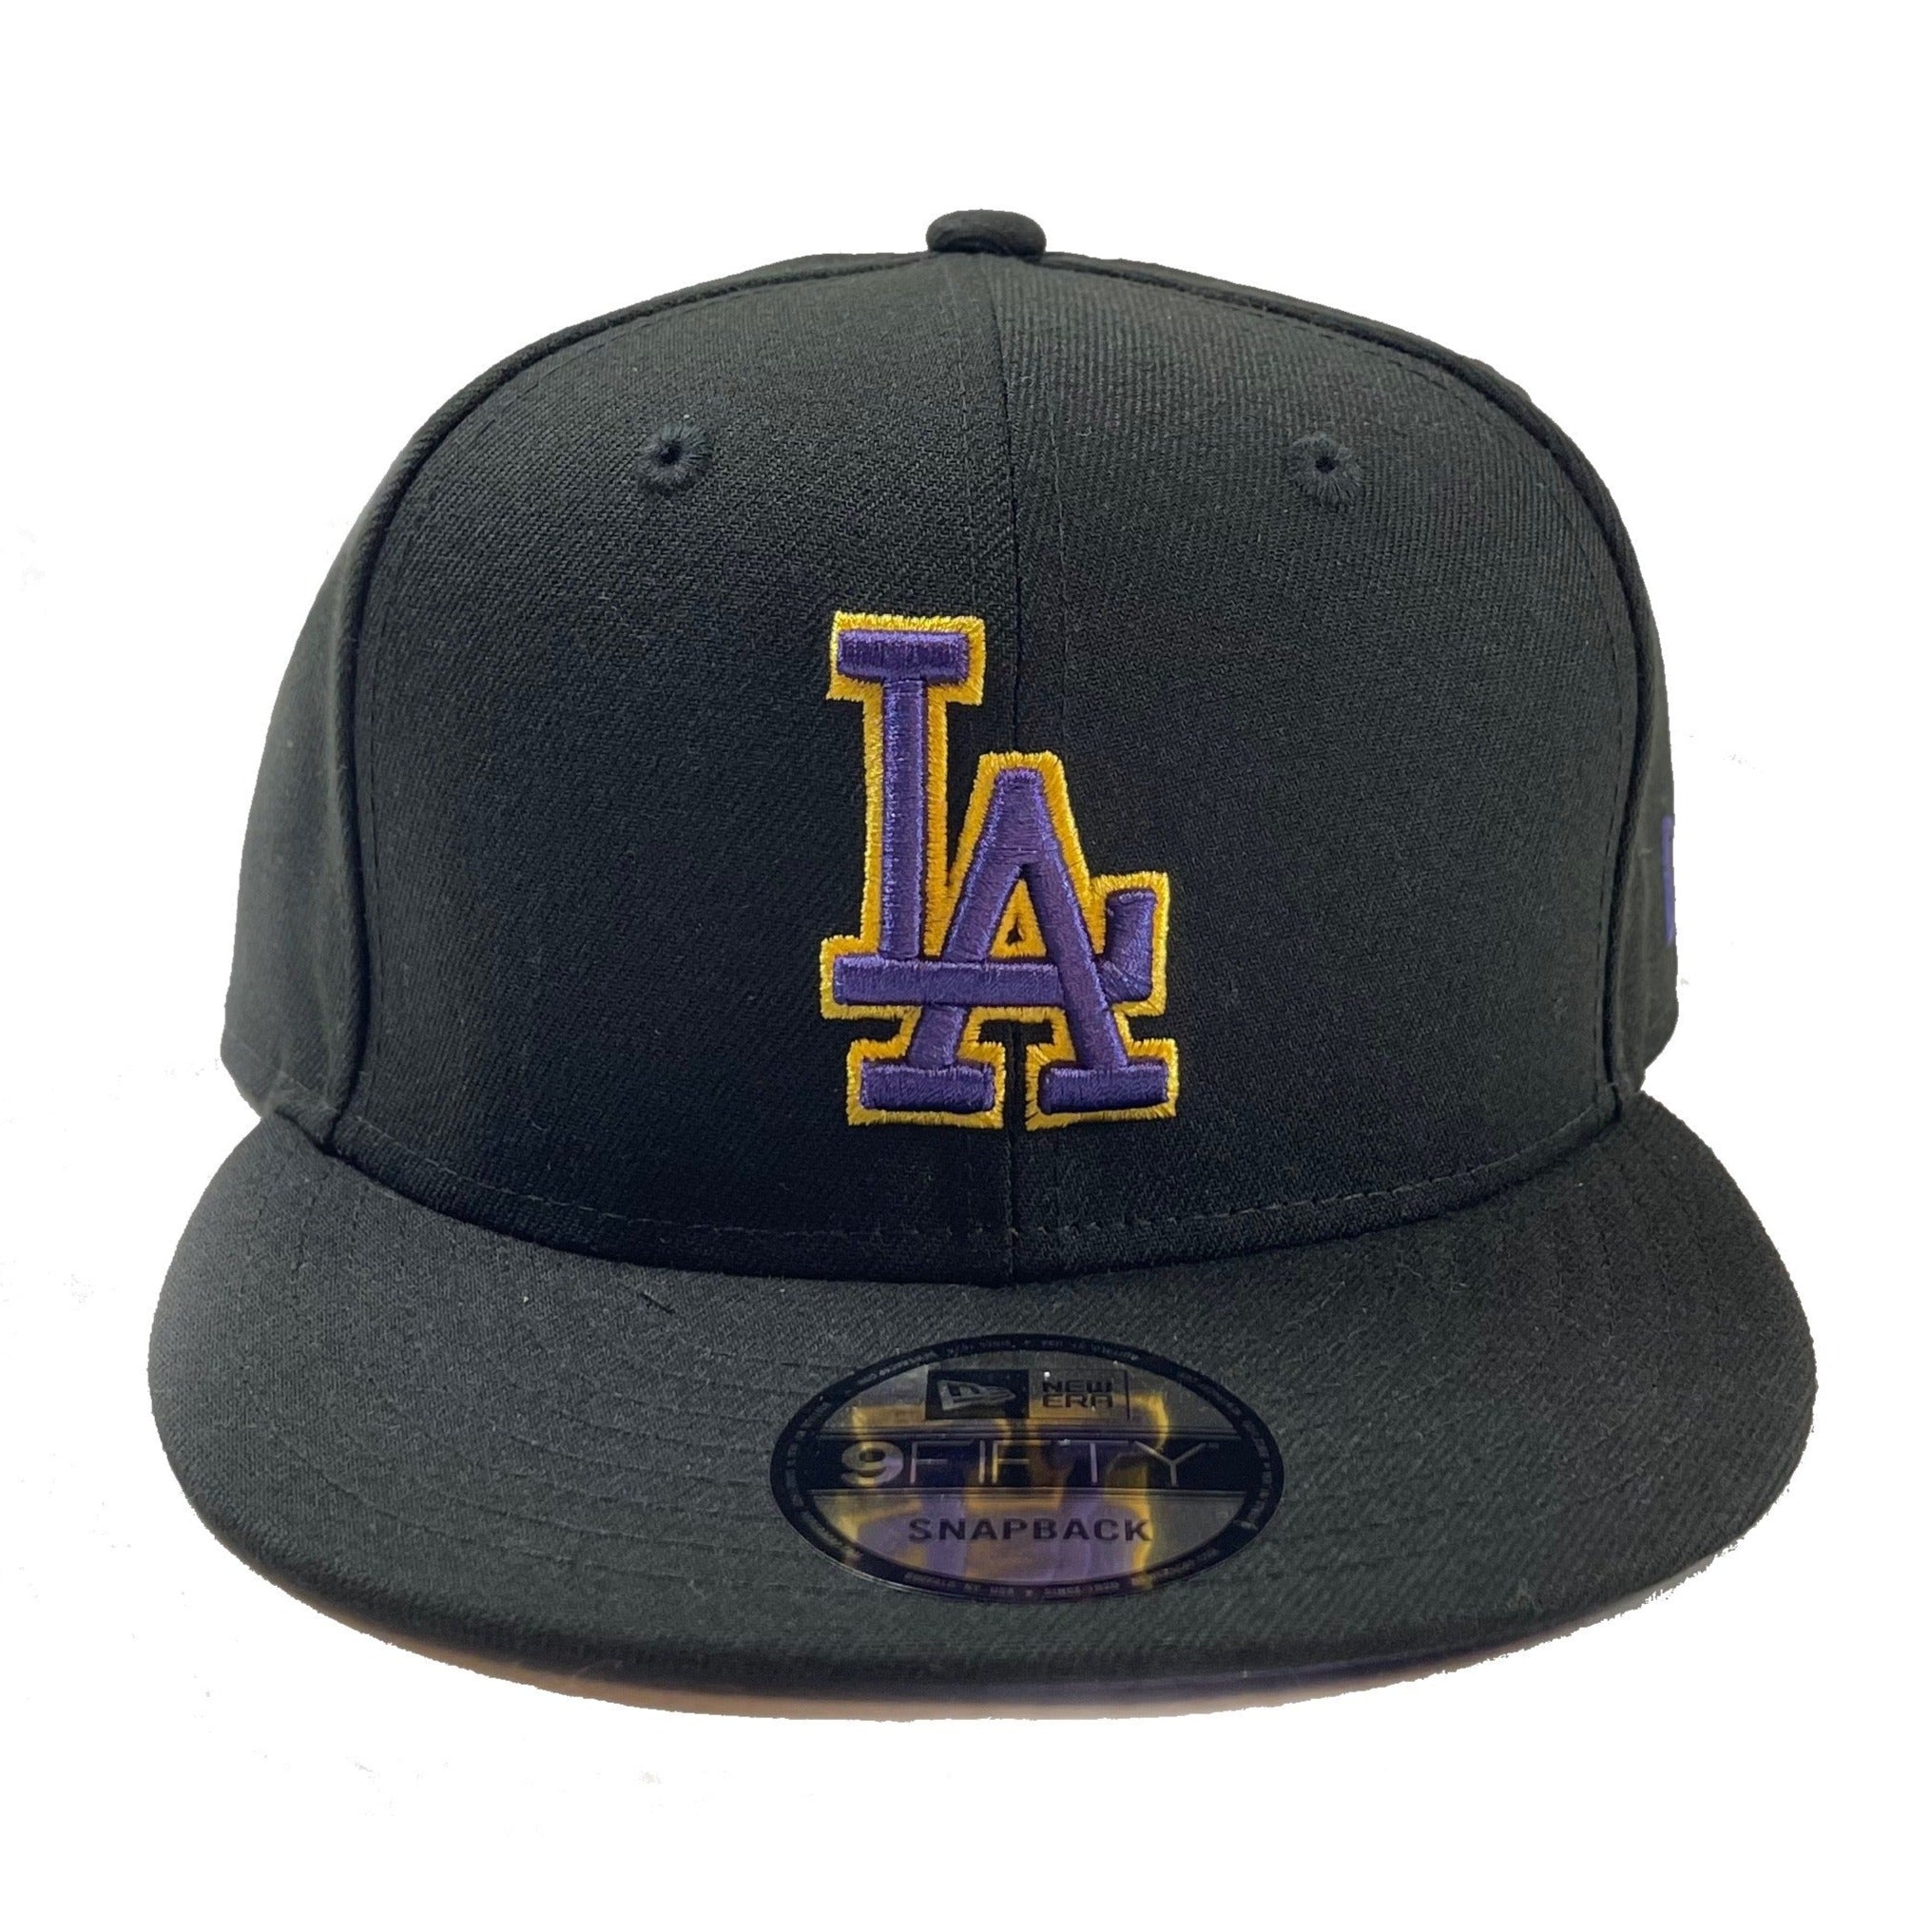 Los Angeles Dodgers Laker Edition (Black) Snapback – Cap World: Embroidery